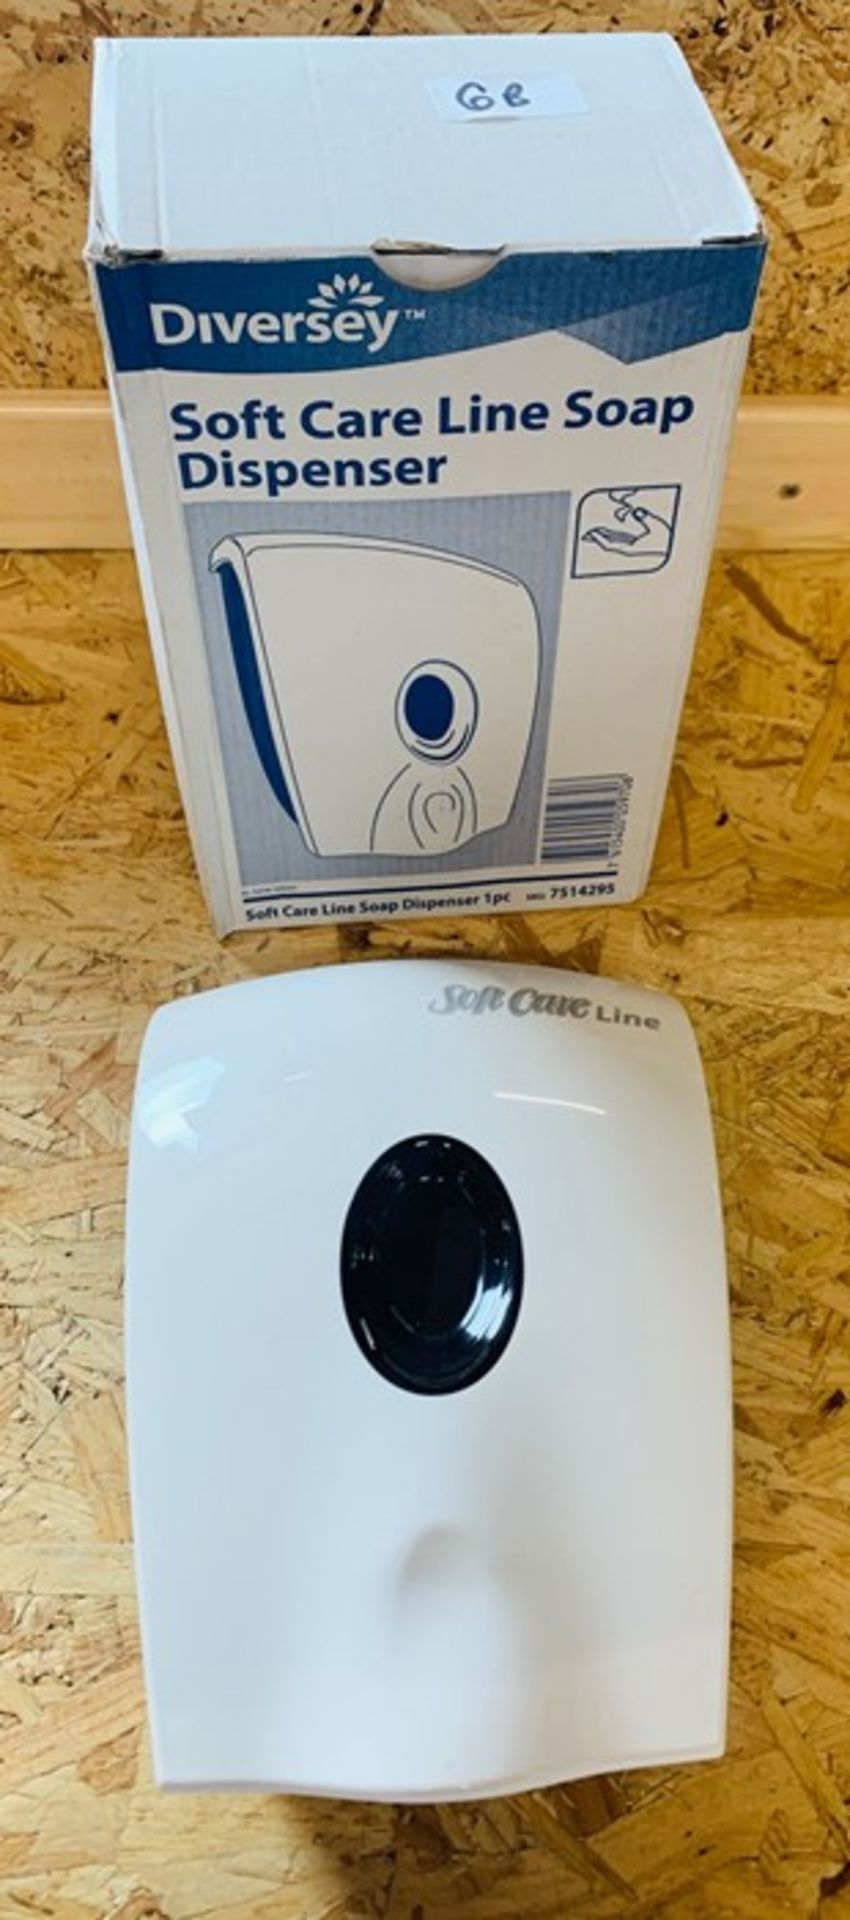 1 x DIVERSEY SOFT CARE LINE SOAP DISPENSER - BOXED - SKU: 7514295 - UNUSED - RRP £33 - Image 2 of 2